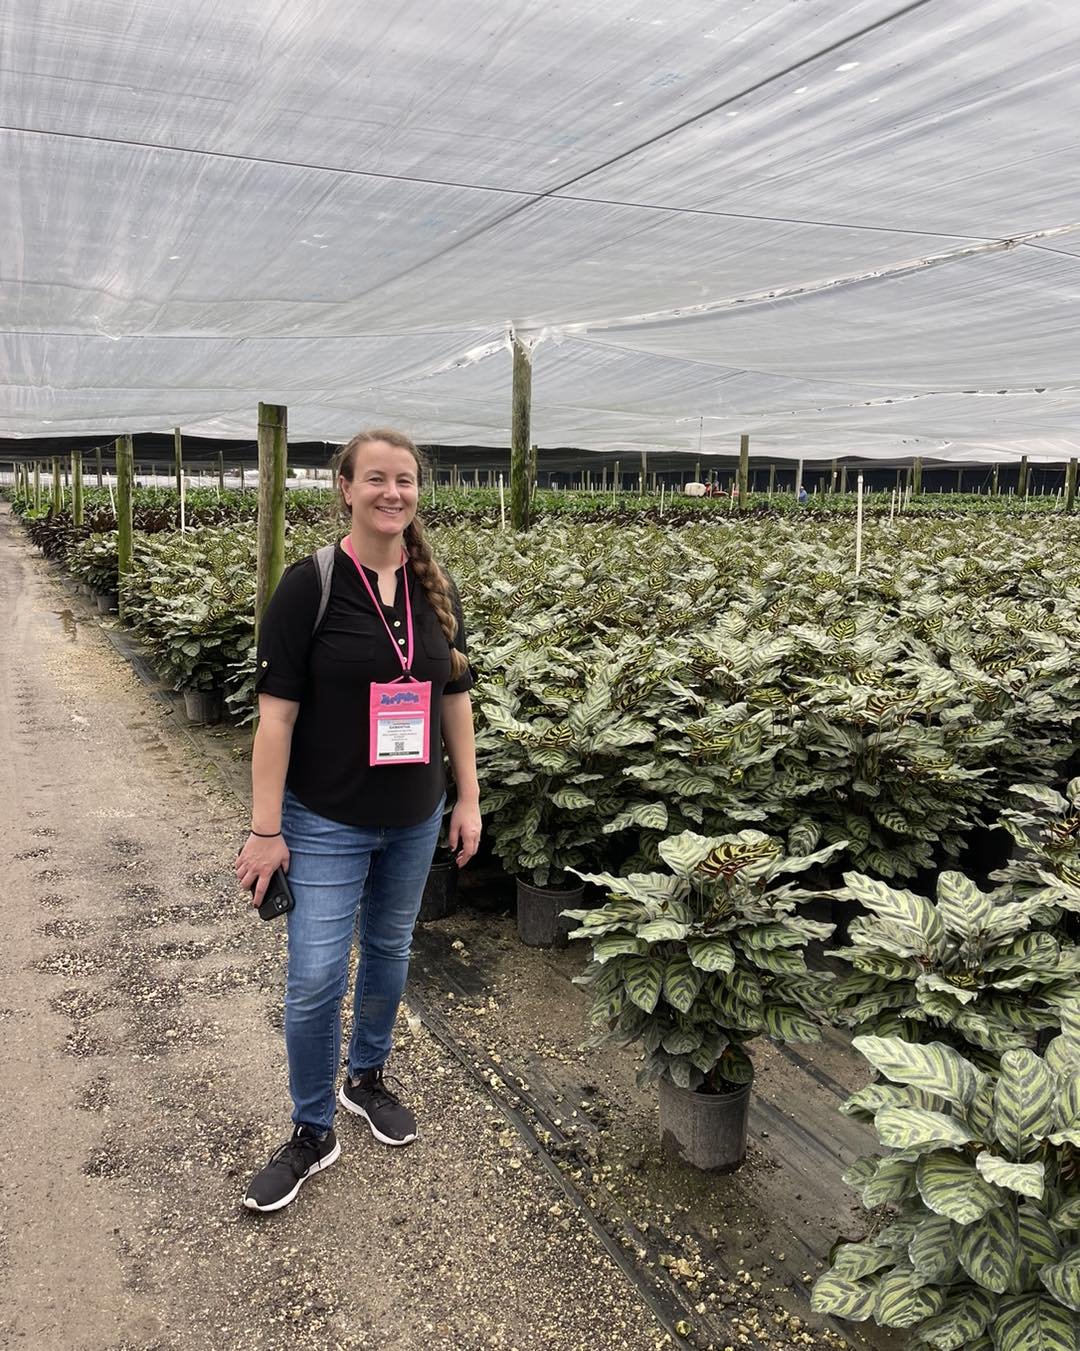 Celebrating Women in Horticulture week (5/27-6/3)  by shedding a light on some of the amazing women we have working at New Garden! Today's spotlight is Samantha Mayor.

She began her  journey at New Garden Gazebo by chance, but she stayed because of 